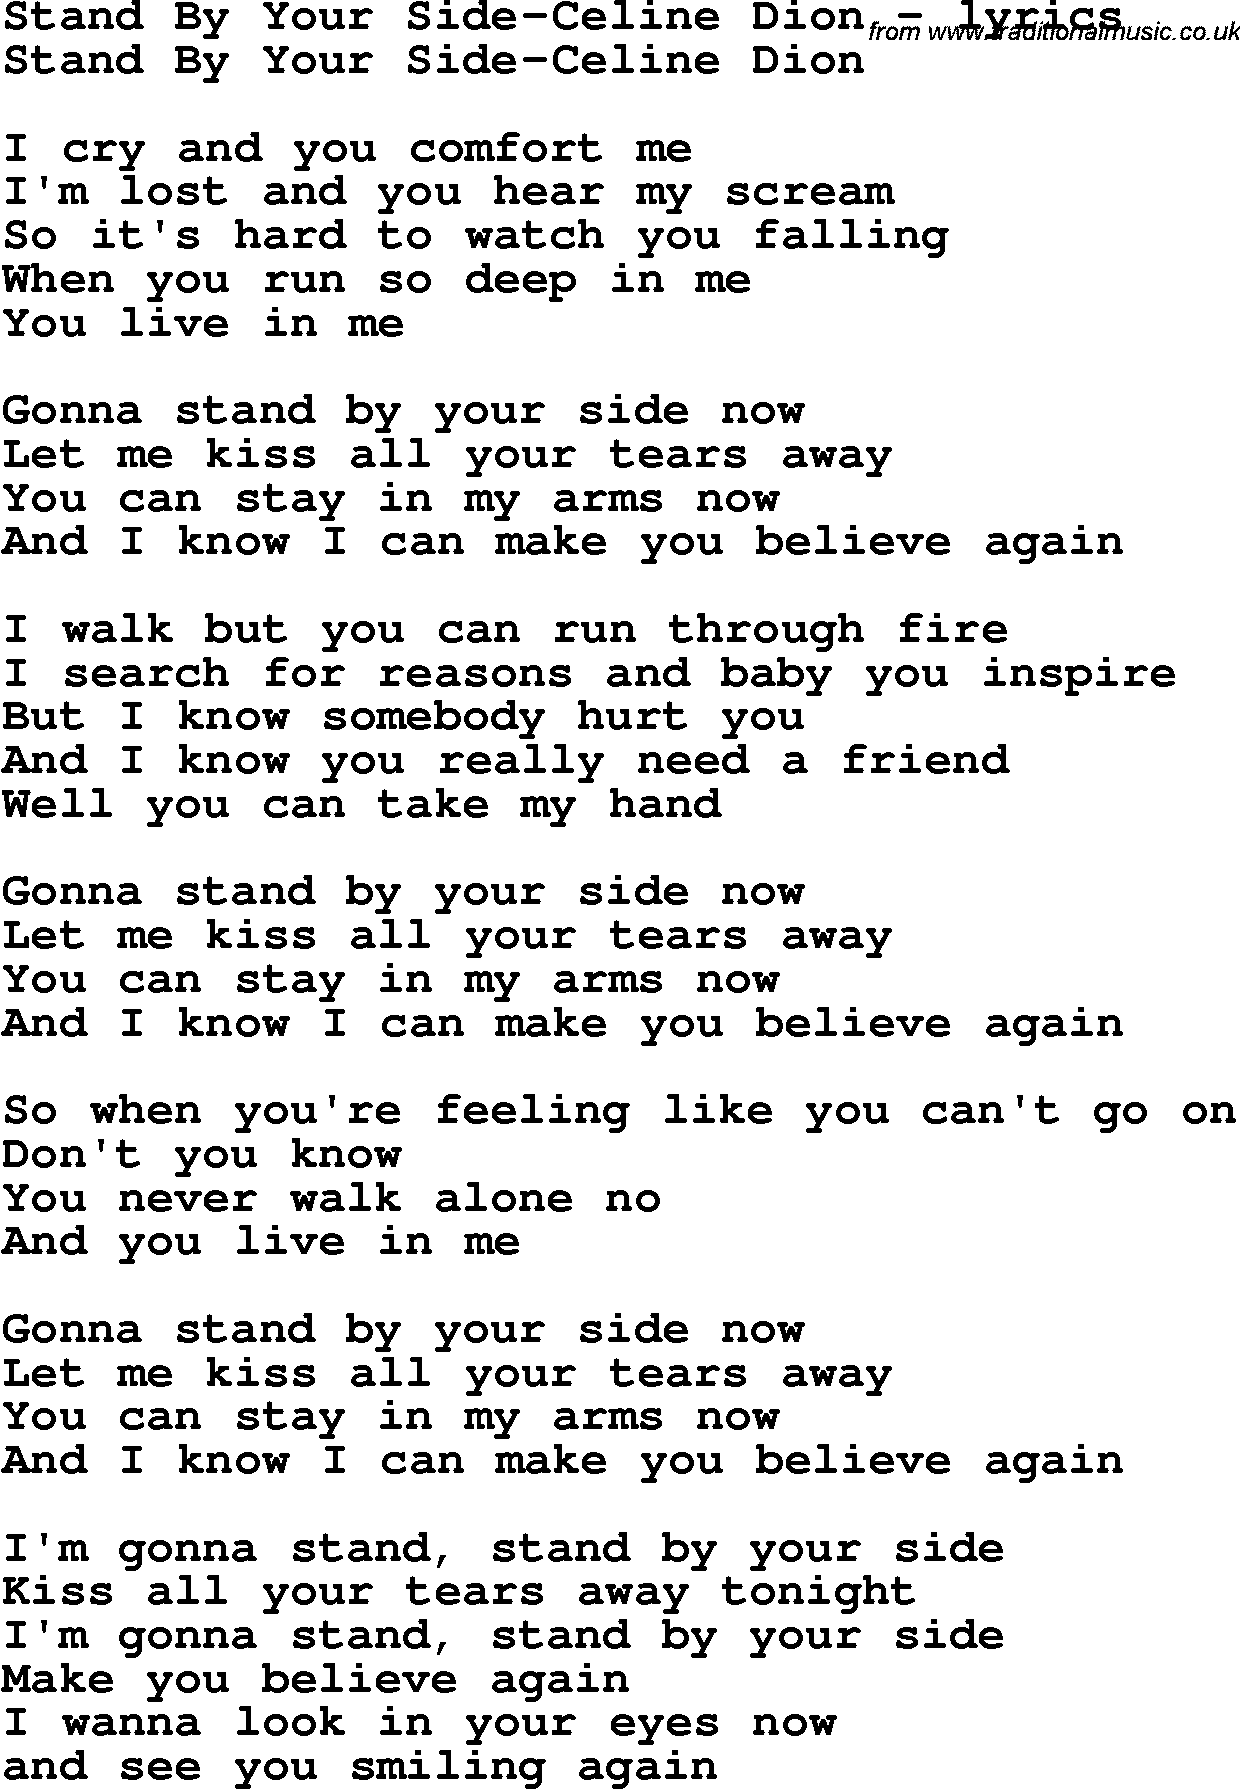 Love Song Lyrics for: Stand By Your Side-Celine Dion